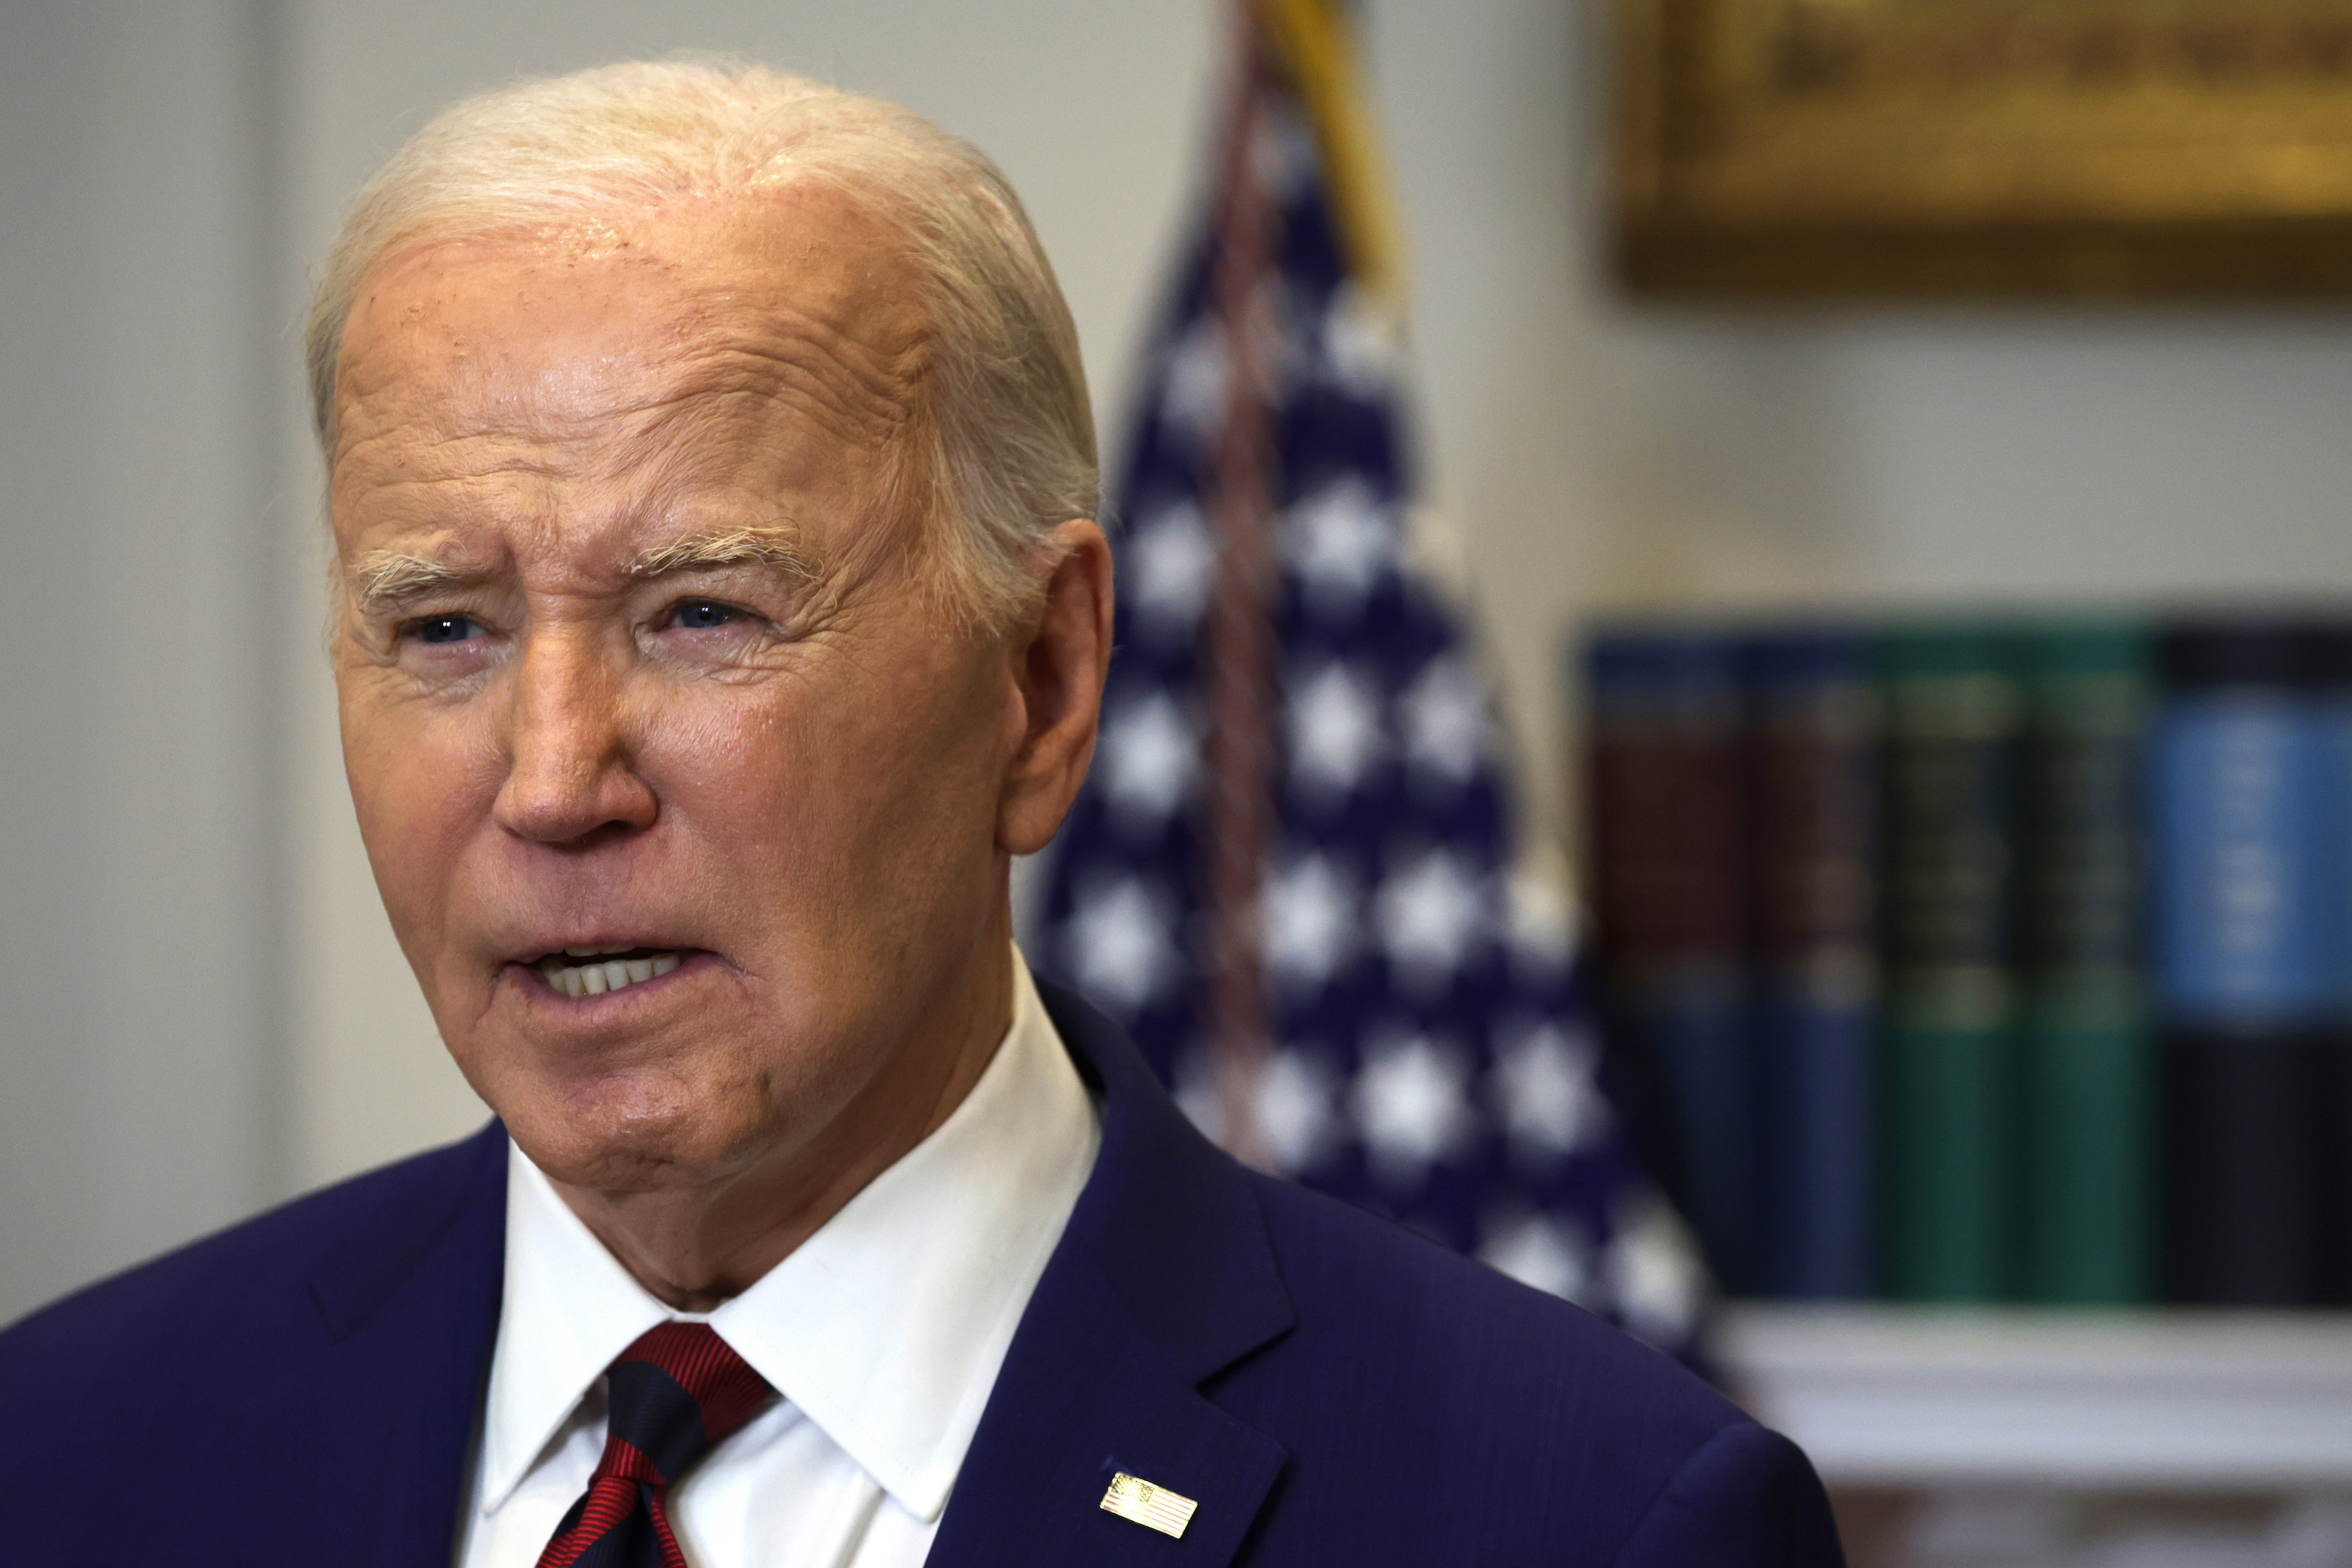 president biden owes student loan borrowers some honesty | opinion